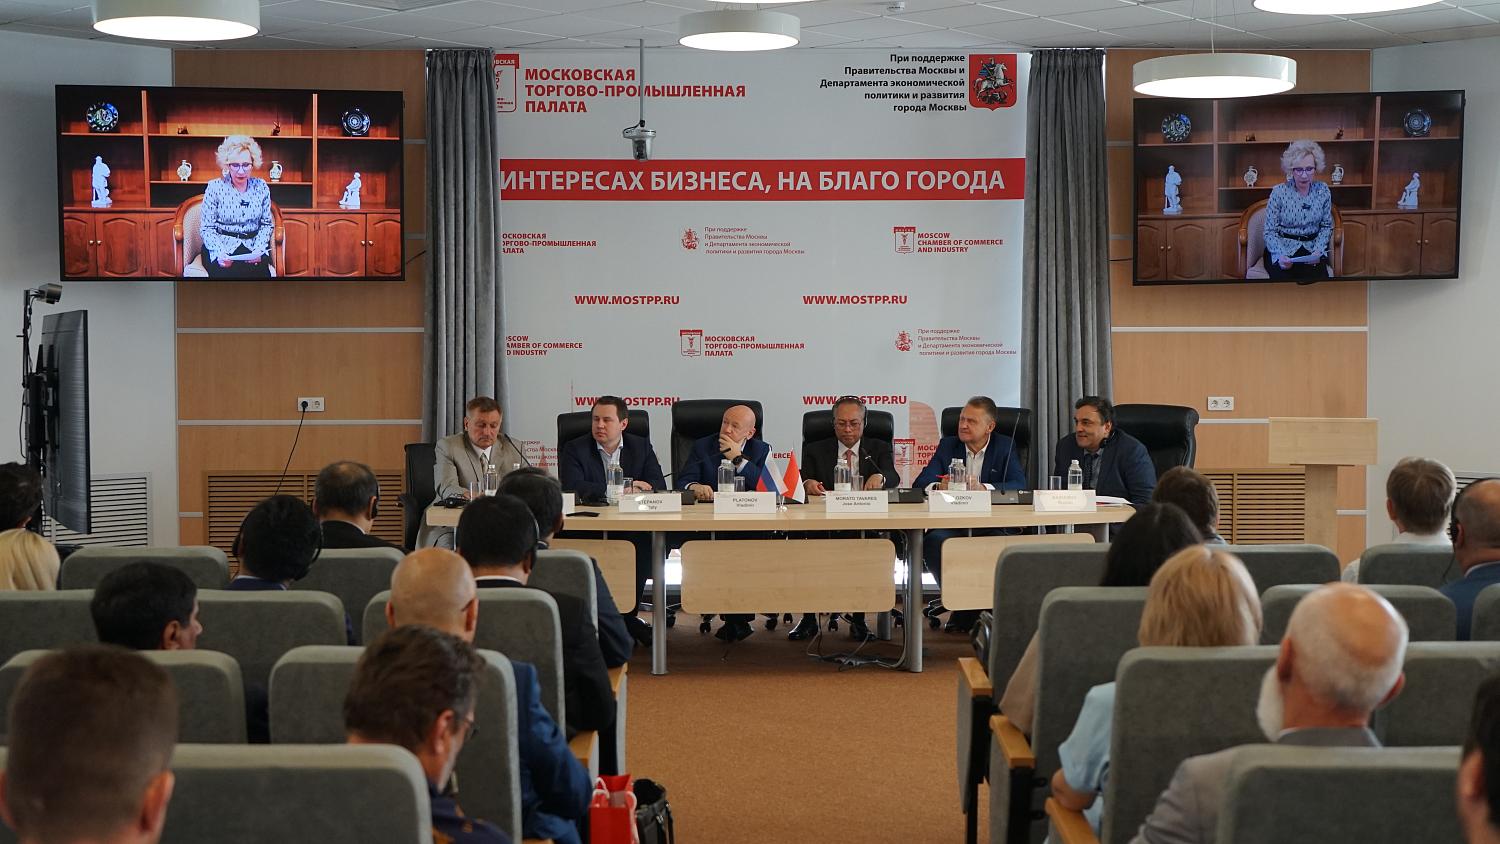 Entrepreneurs from Moscow and Indonesia discussed new business opportunities